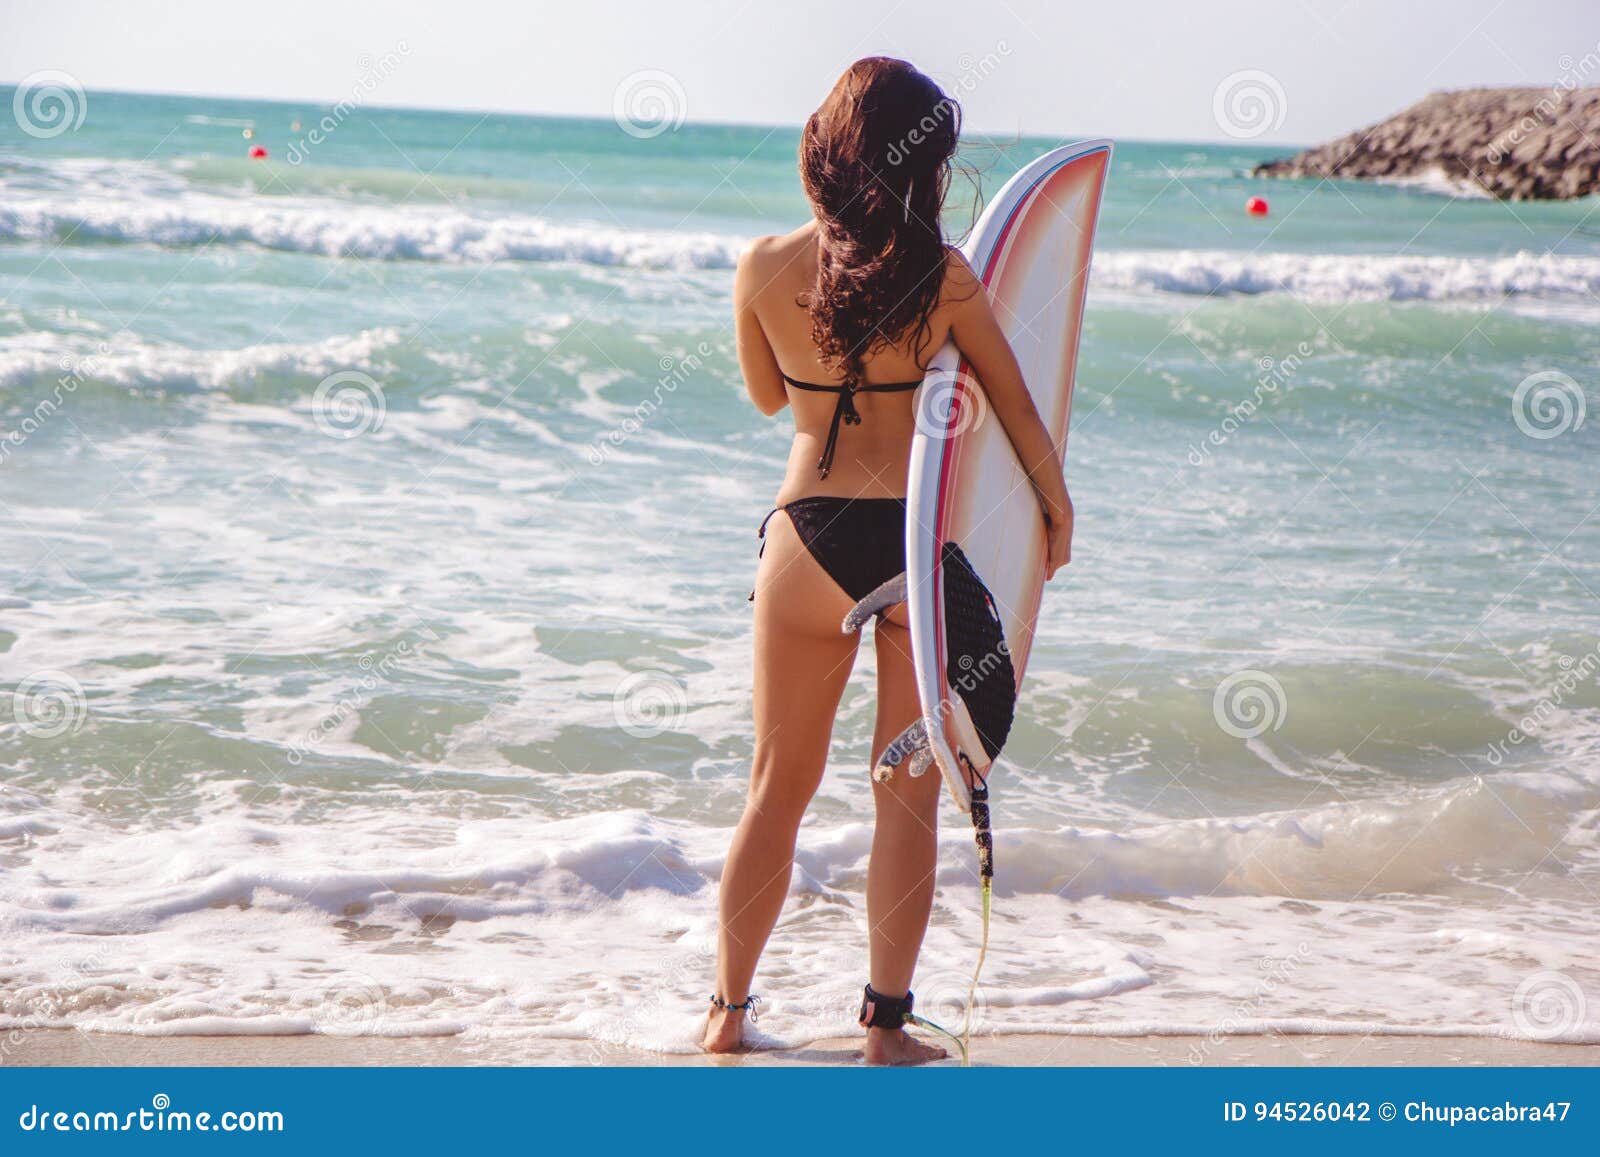 Beautiful Surfer Brunette Girl On The Beach At Sunset Time